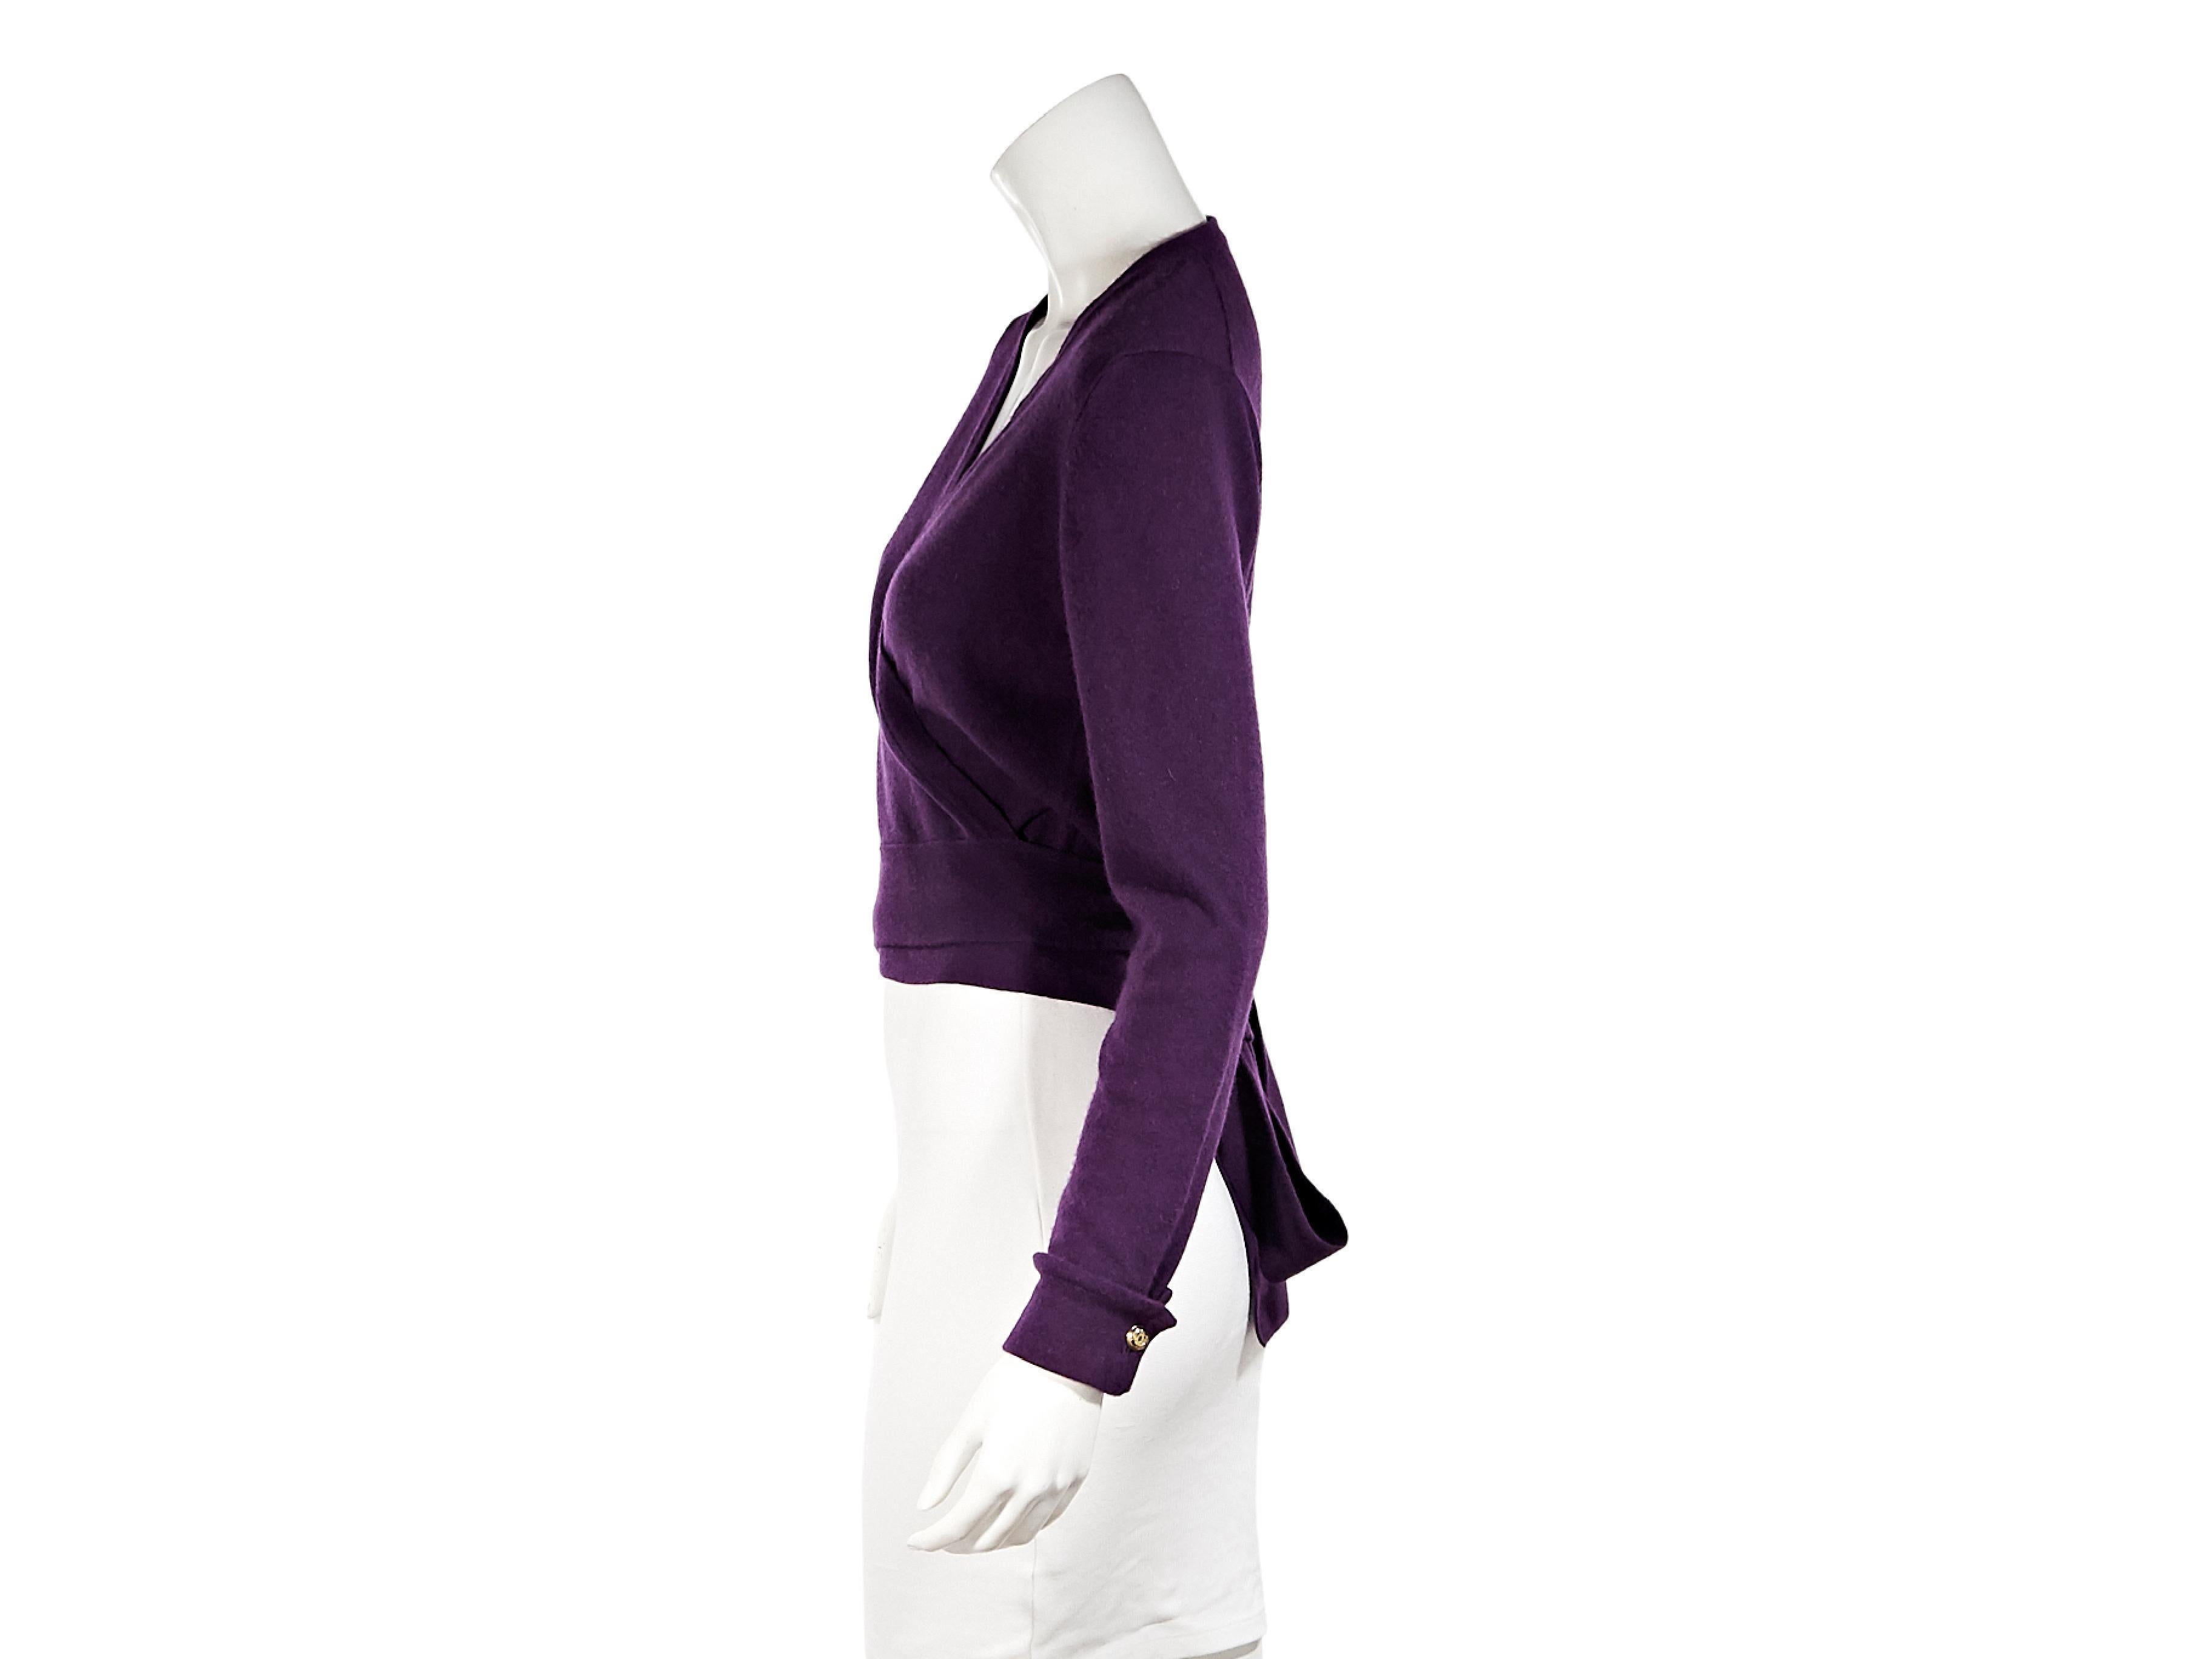 Product details:  Vintage purple cashmere cropped wrap sweater by Chanel.  V-neck.  Long sleeves.  Tie back closure.  30